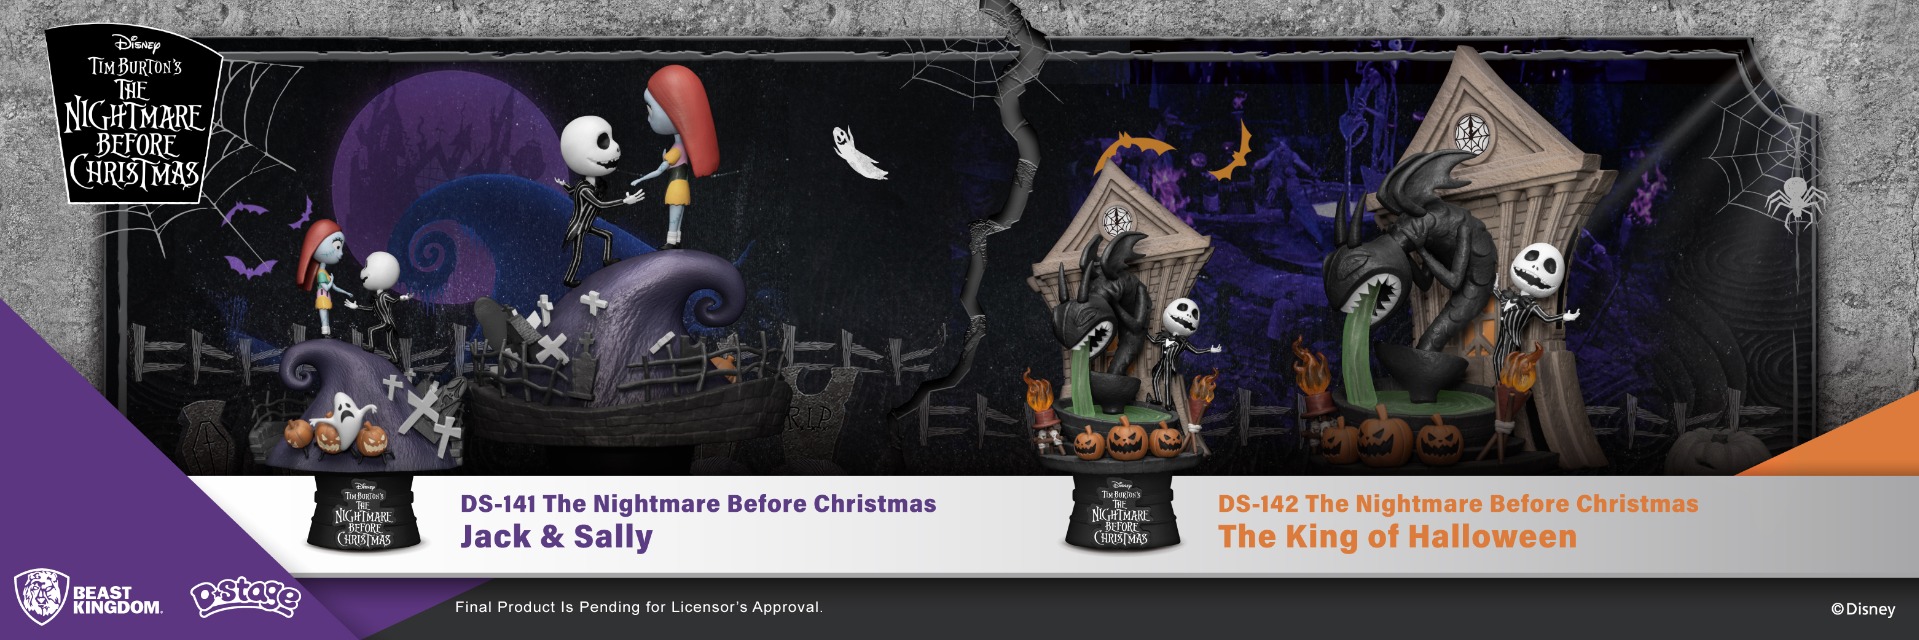 DS-141-The Nightmare Before Christmas-Jack & Sally & DS-142-The Nightmare Before Christmas-The King of Halloween